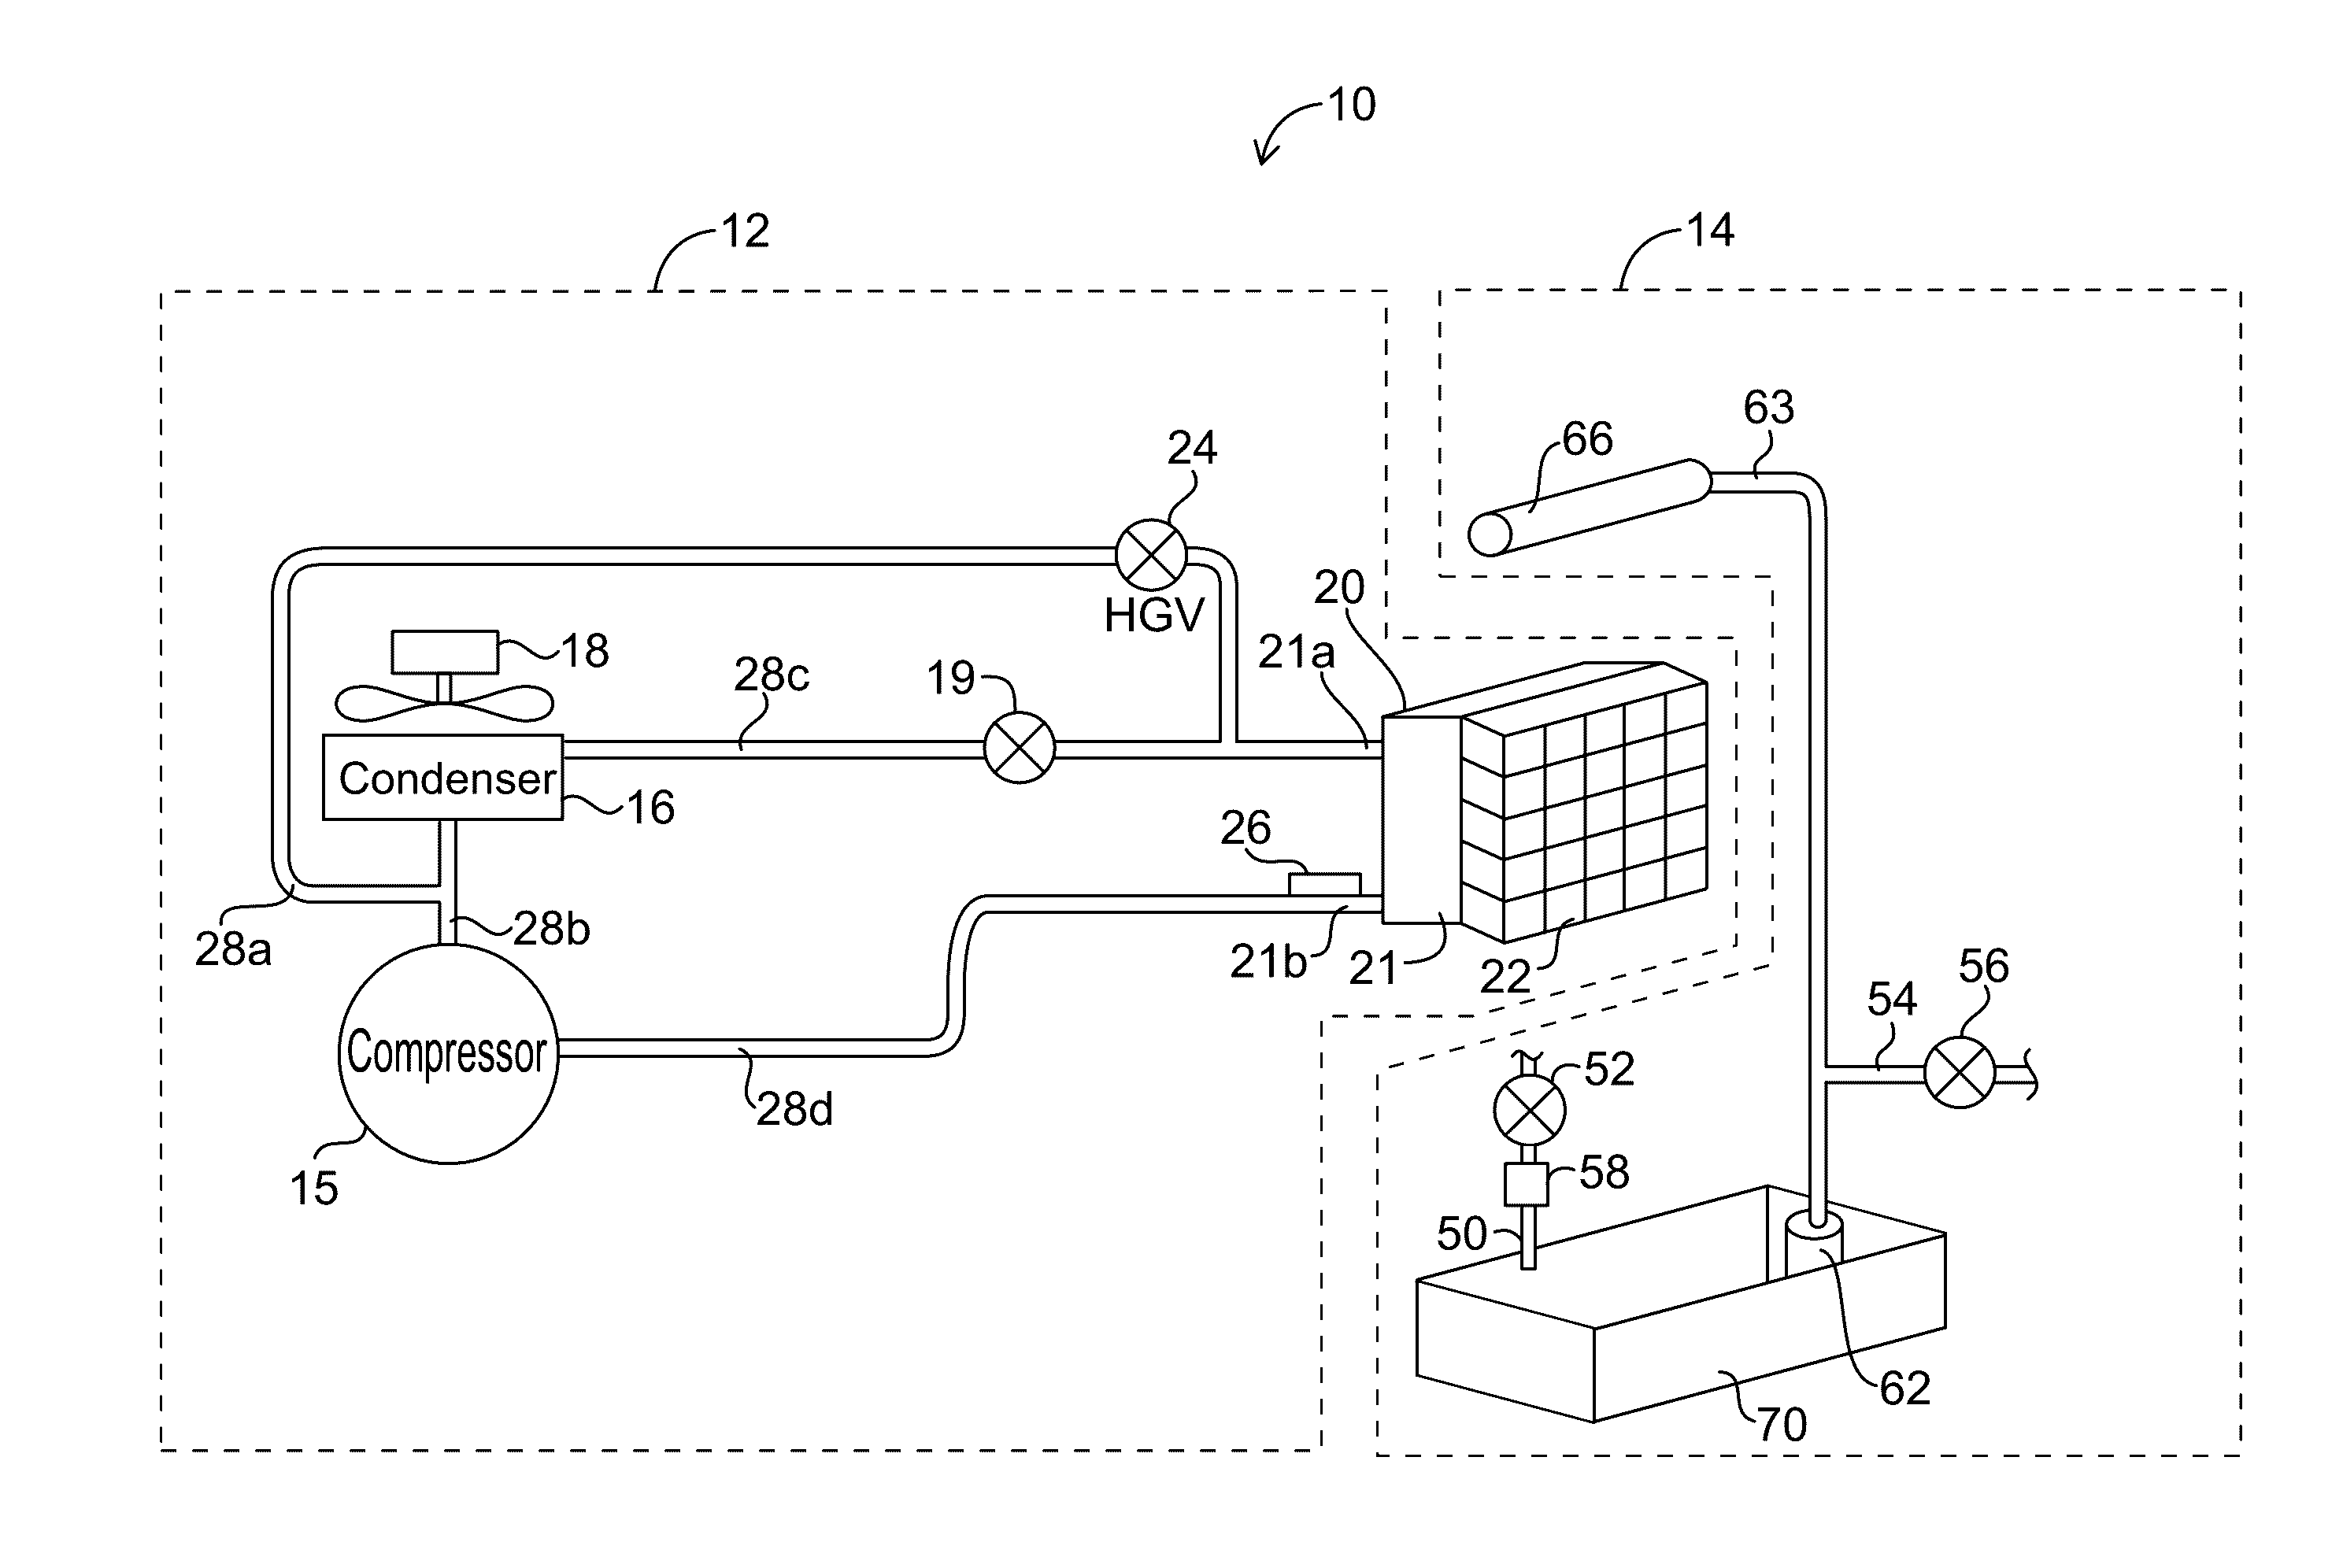 Ice maker with push notification to indicate when maintenance is required